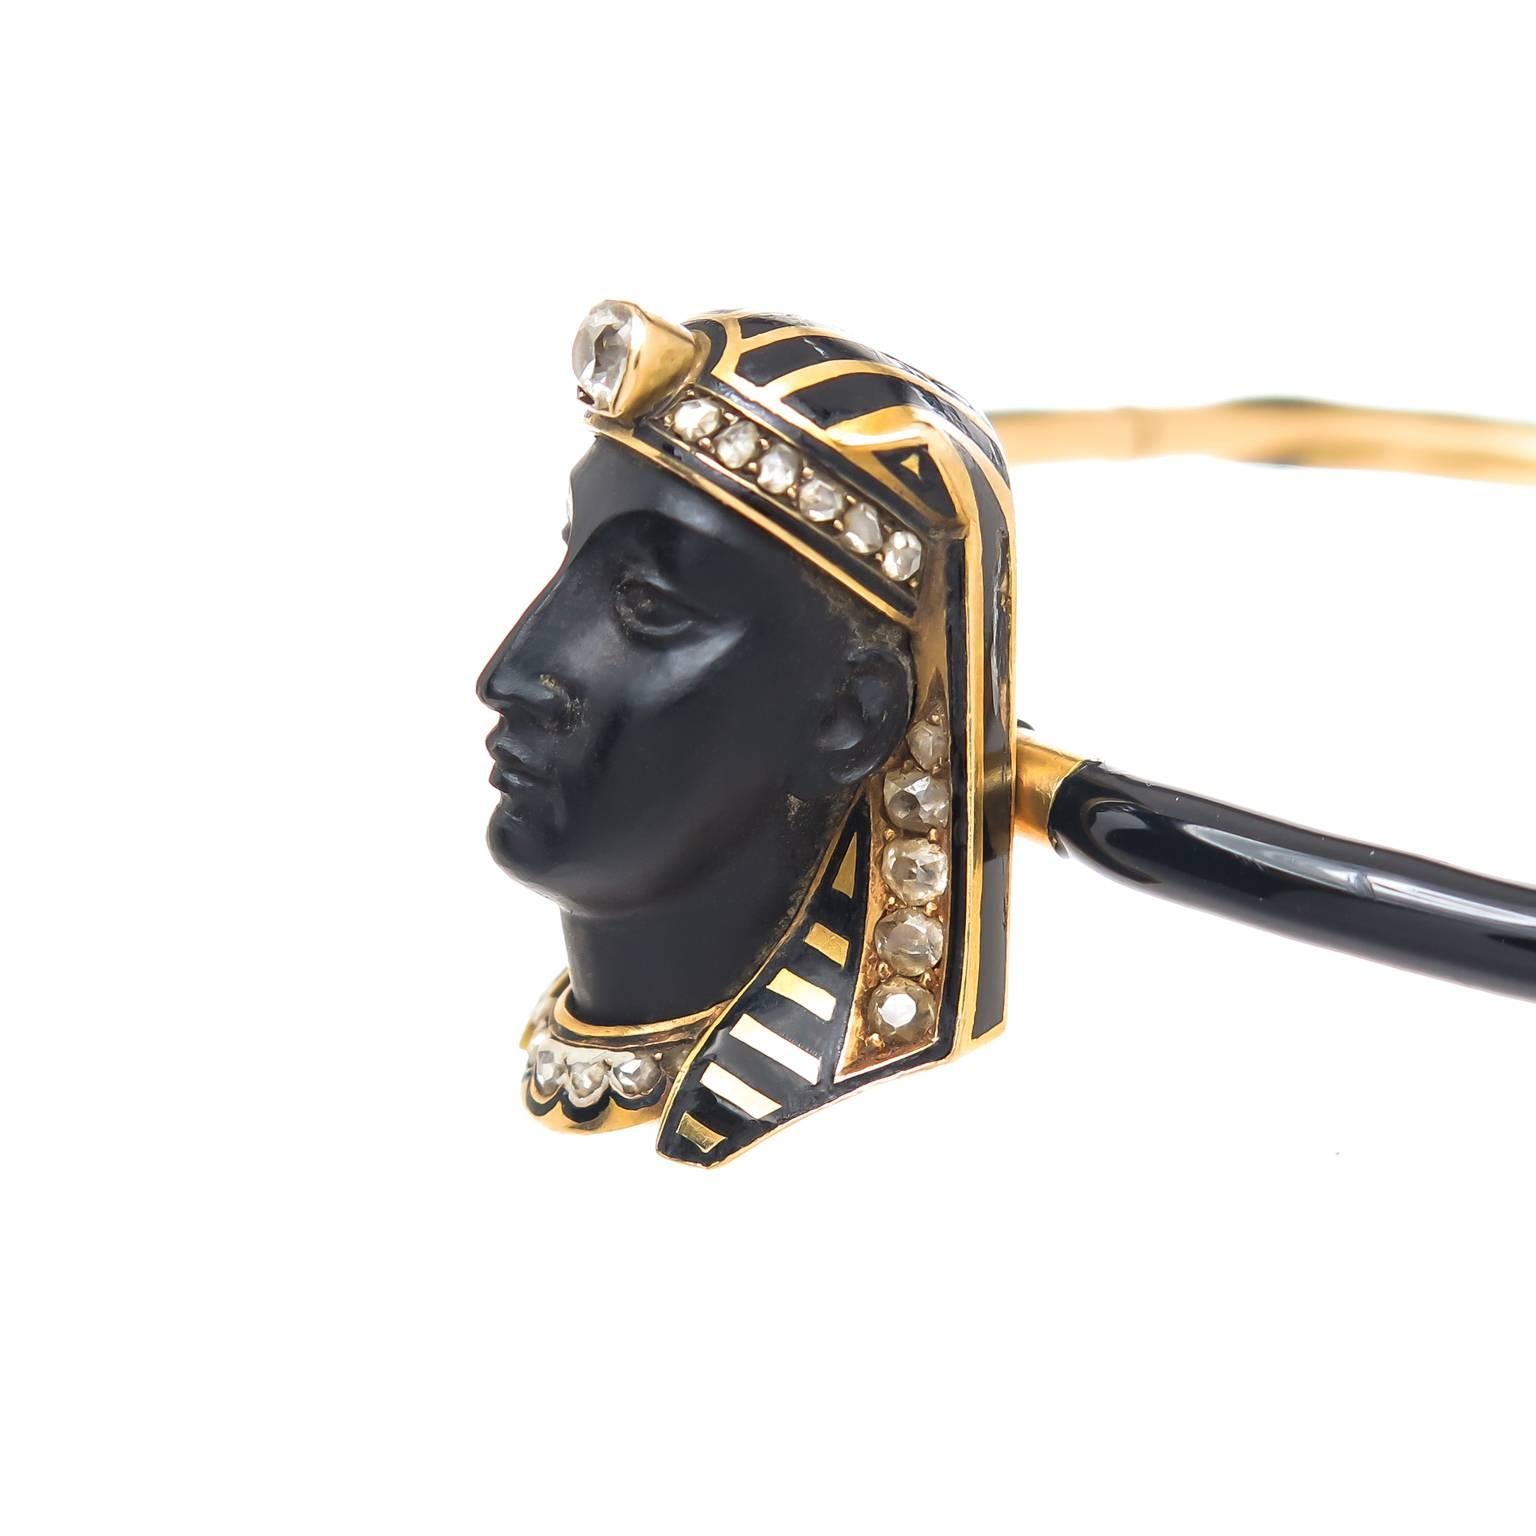 Circa 1910 Tiffany & Company 14K yellow Gold Egyptian revival Bangle Bracelet. Having Black Enamel and a Carved Black Stone Face and a Head Dress of Black enamel and further decorated with Rose cut and Mine cut Diamonds. The head portion measures 1